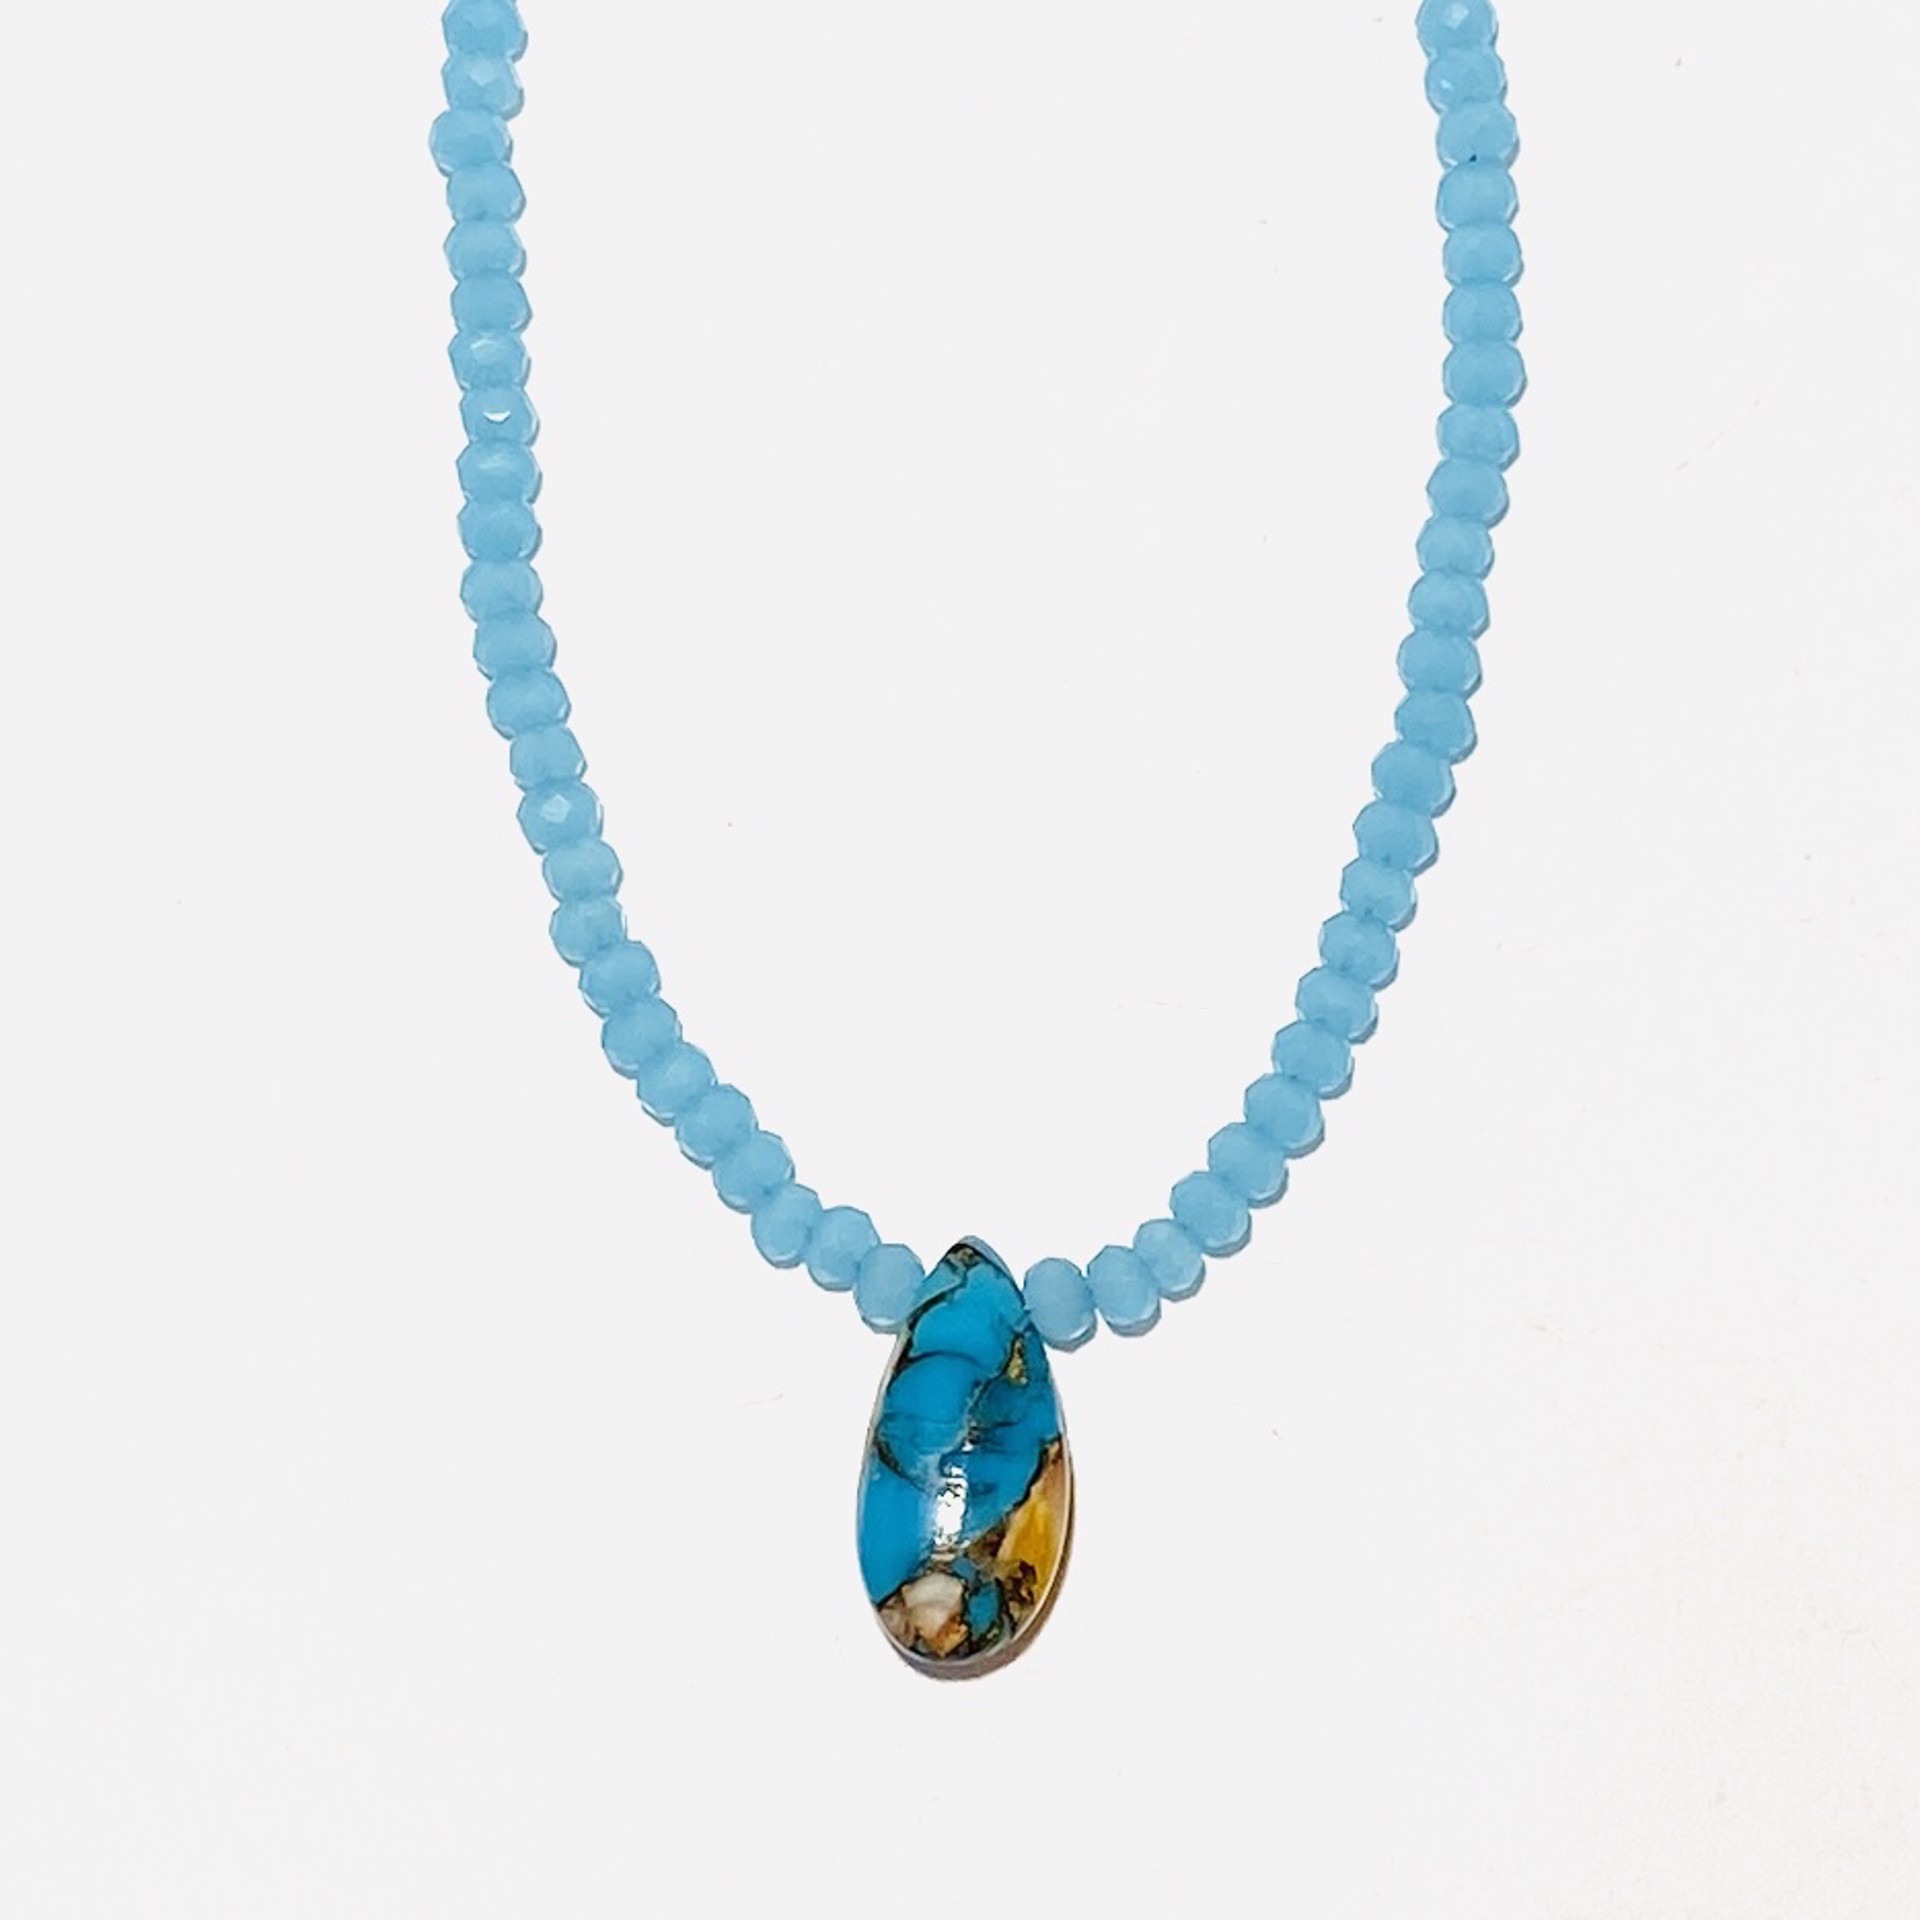 Small Faceted Blue Jade Turquoise  Necklace by Nance Trueworthy